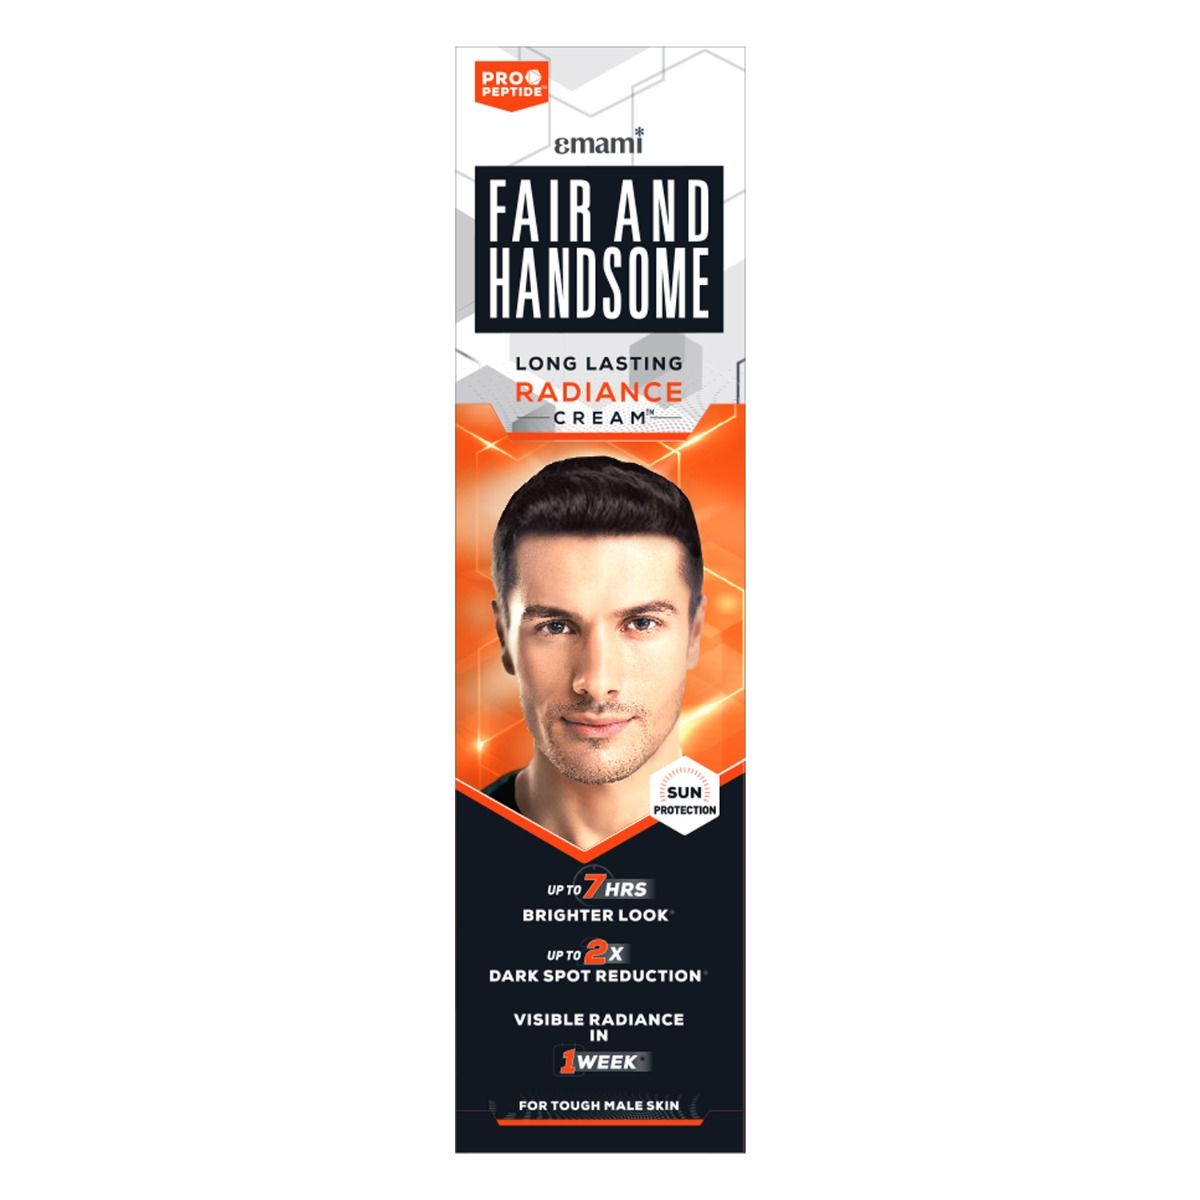 Fair and Handsome Long Lasting Radiance Cream, 15 gm, Pack of 1 